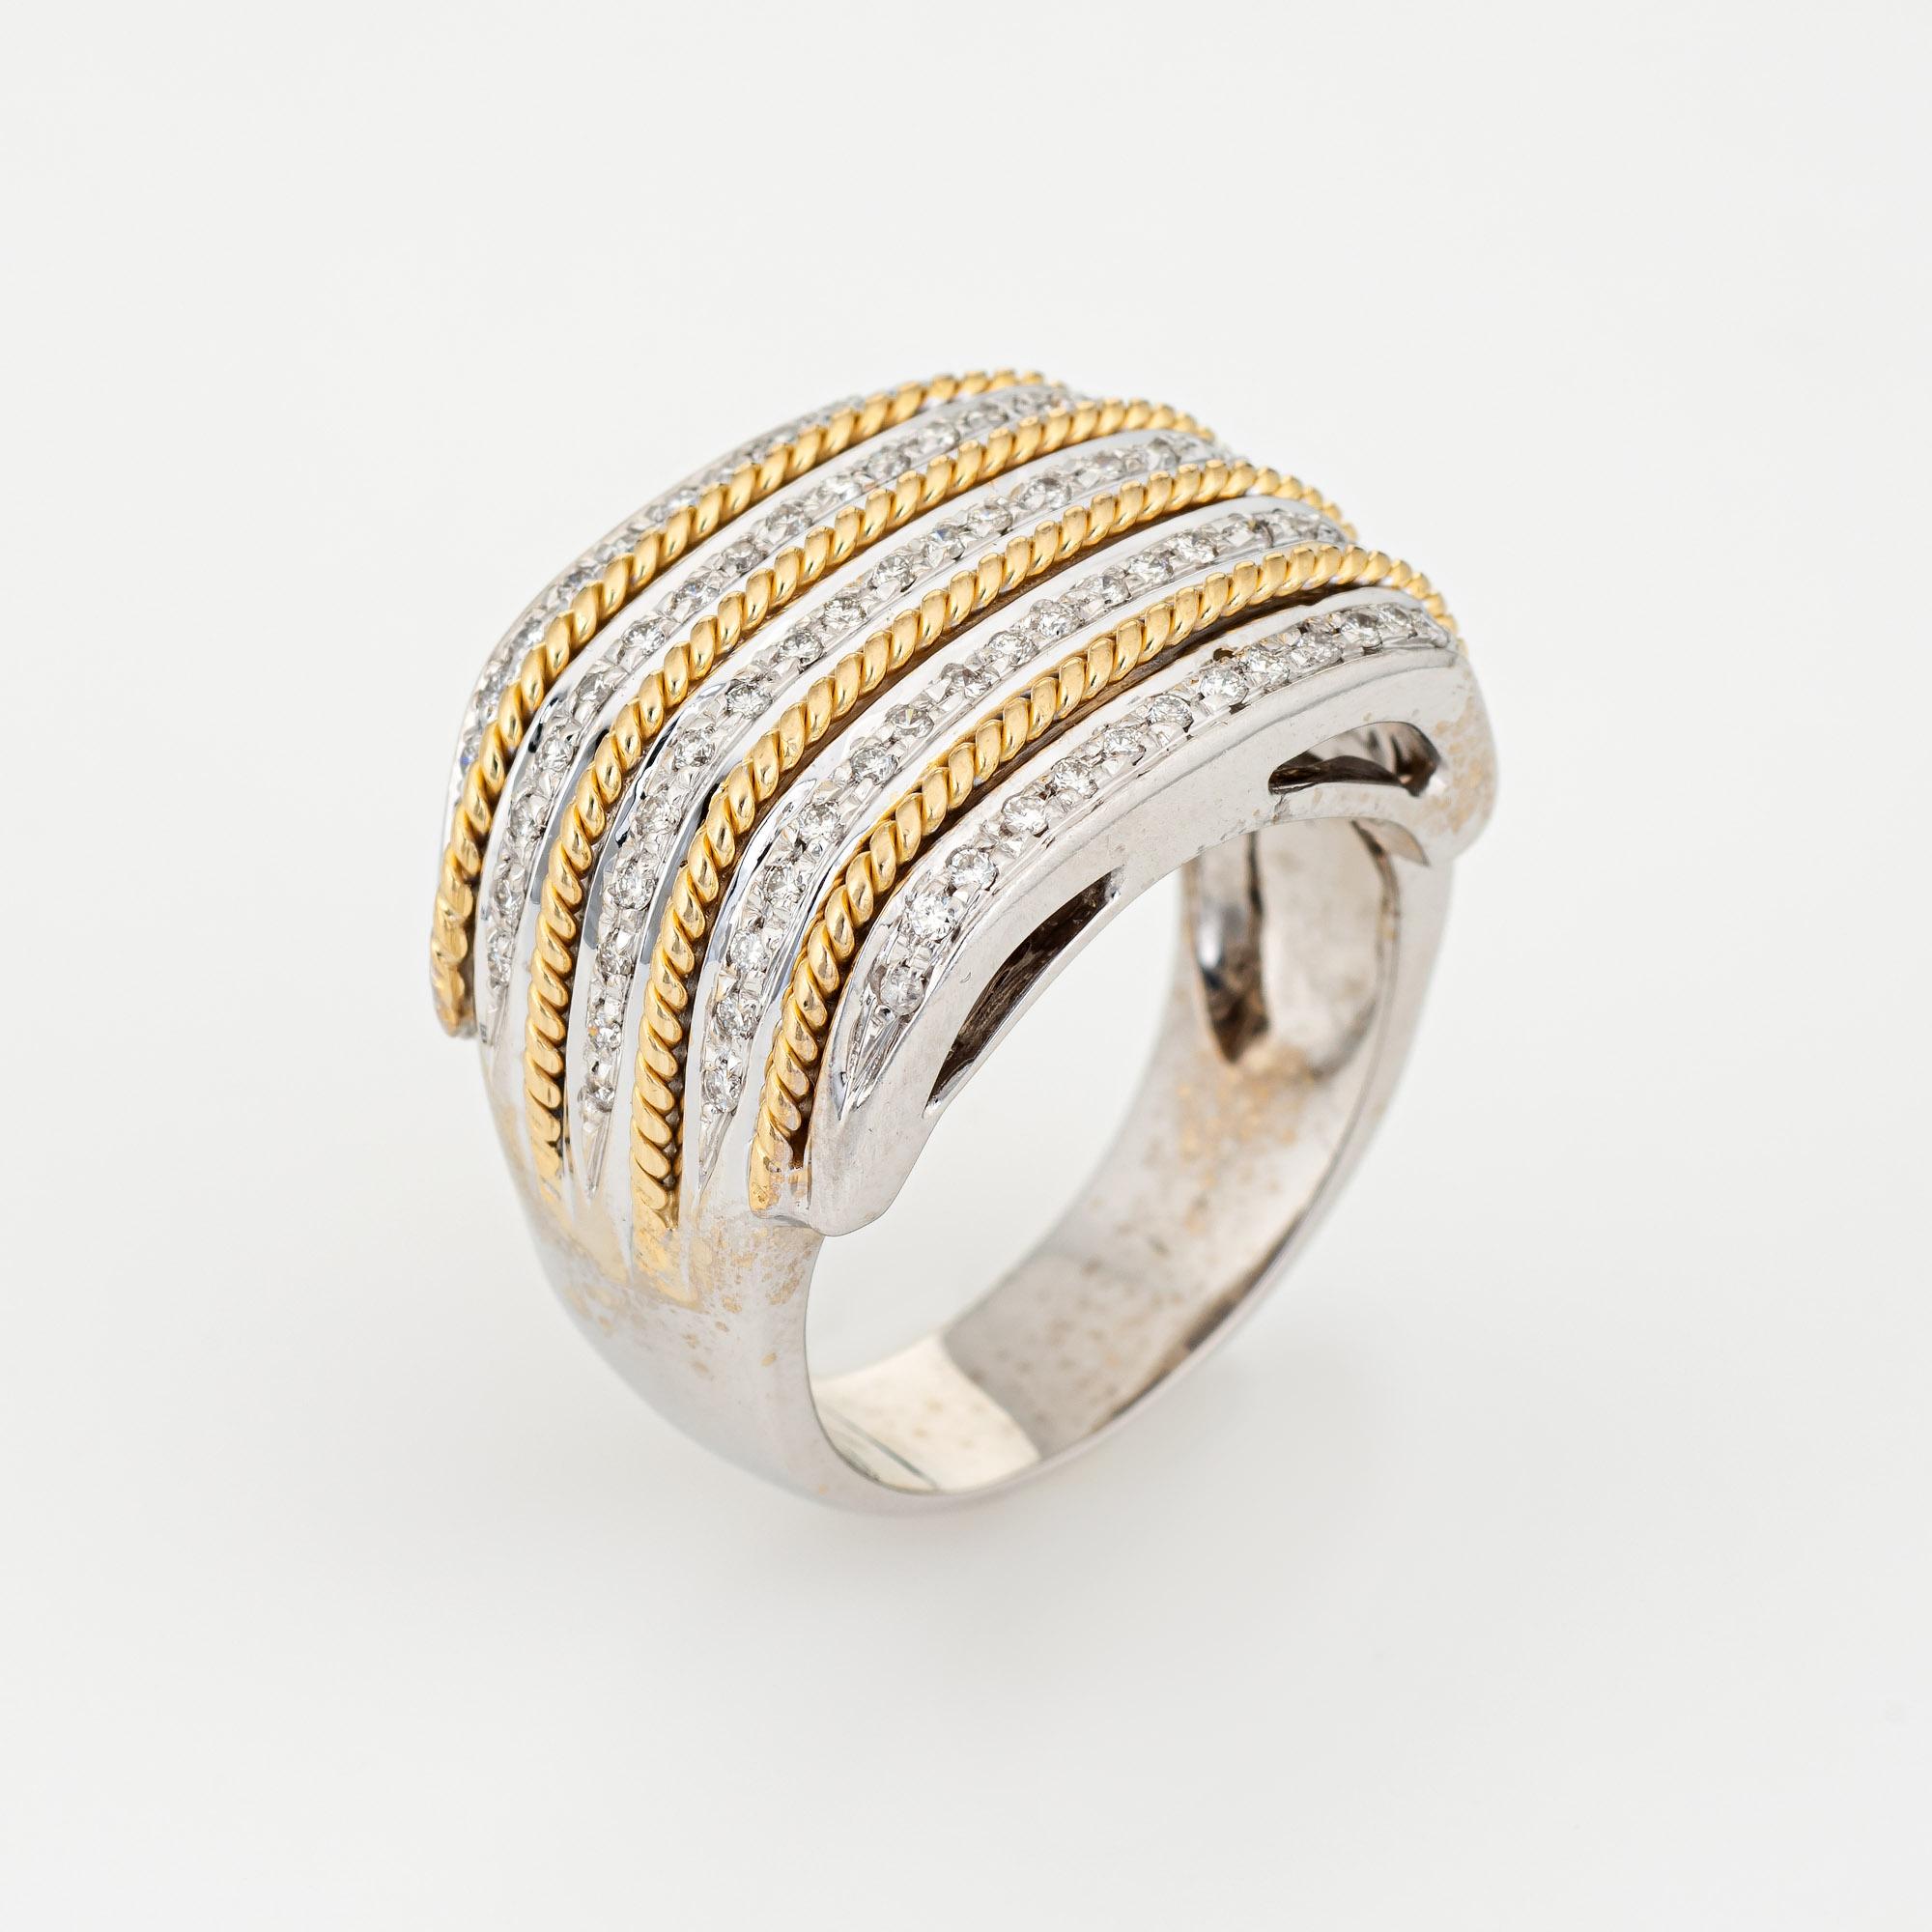 Stylish vintage diamond wide band (circa 1990s) crafted in two-tone 18 karat white & yellow gold. 

85 round brilliant cut diamonds total an estimated 0.42 carats (estimated at I-J color and SI1-2 clarity). 

The wide band (17mm - 0.66 inches) is